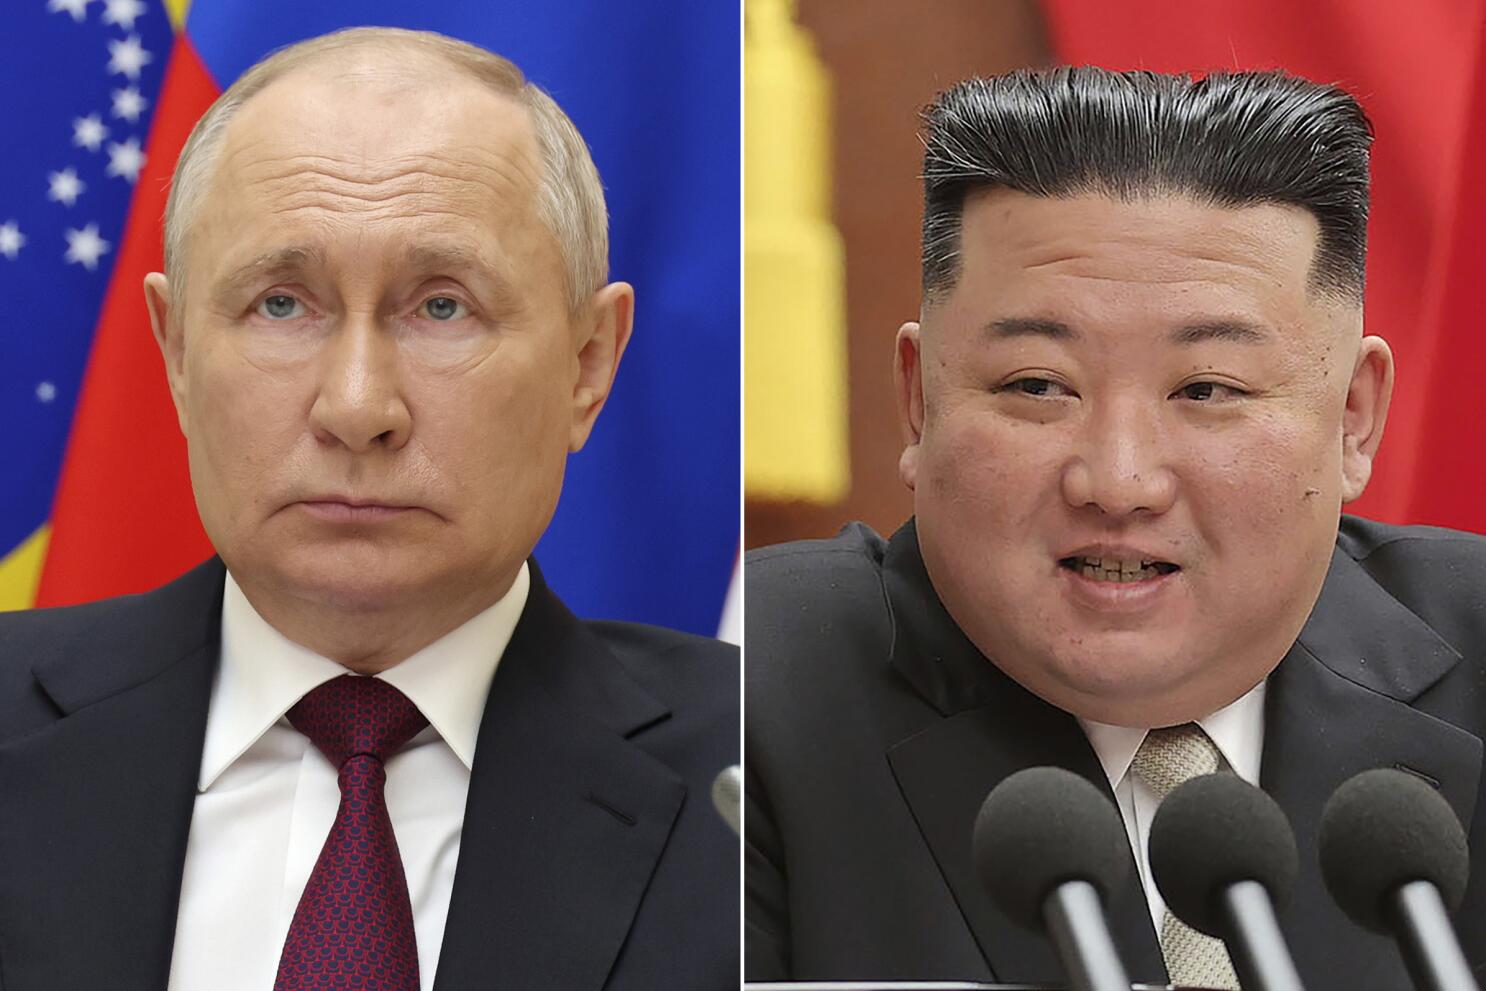 Kim Jong Un and Putin: Does their Meeting Signify an Arms Deal?